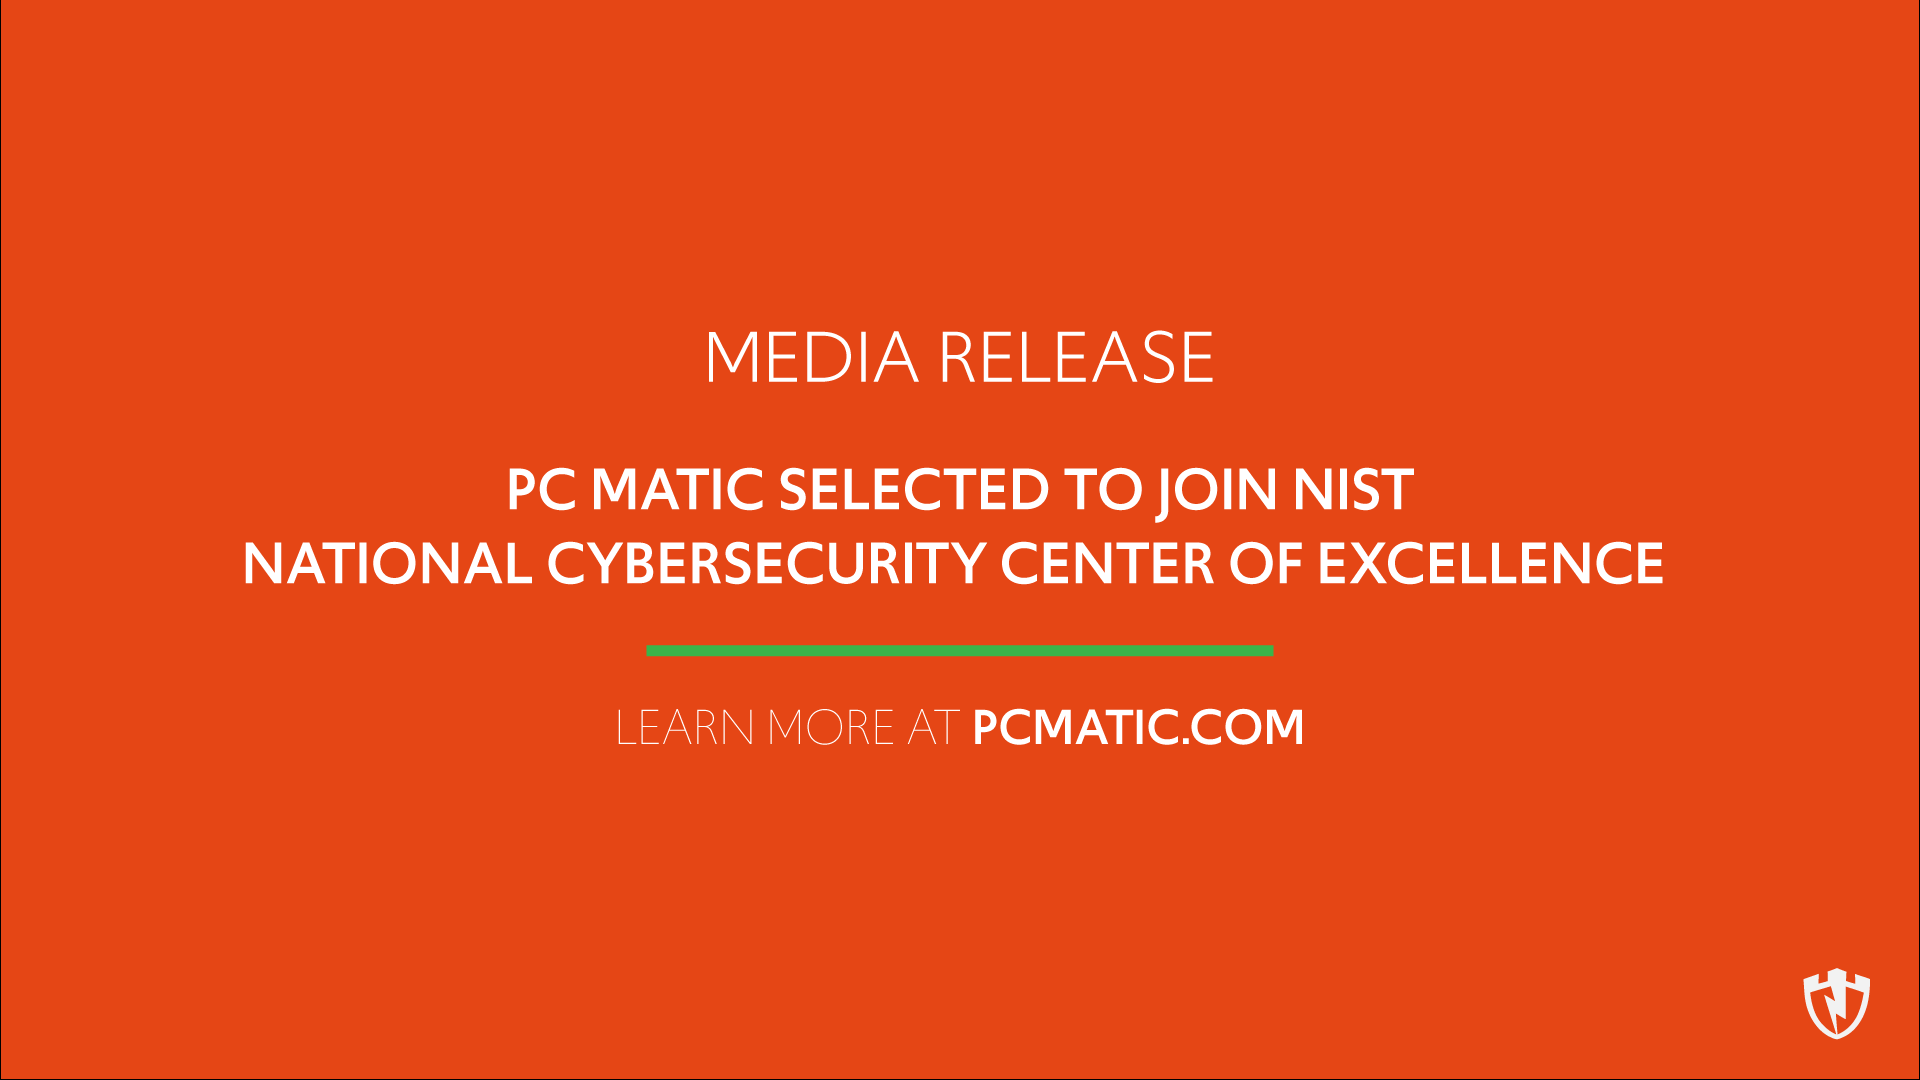 PC Matic joins with NIST's NCCoE's Cybersecurity Center to help Business & Government Agencies combat cyber crime.